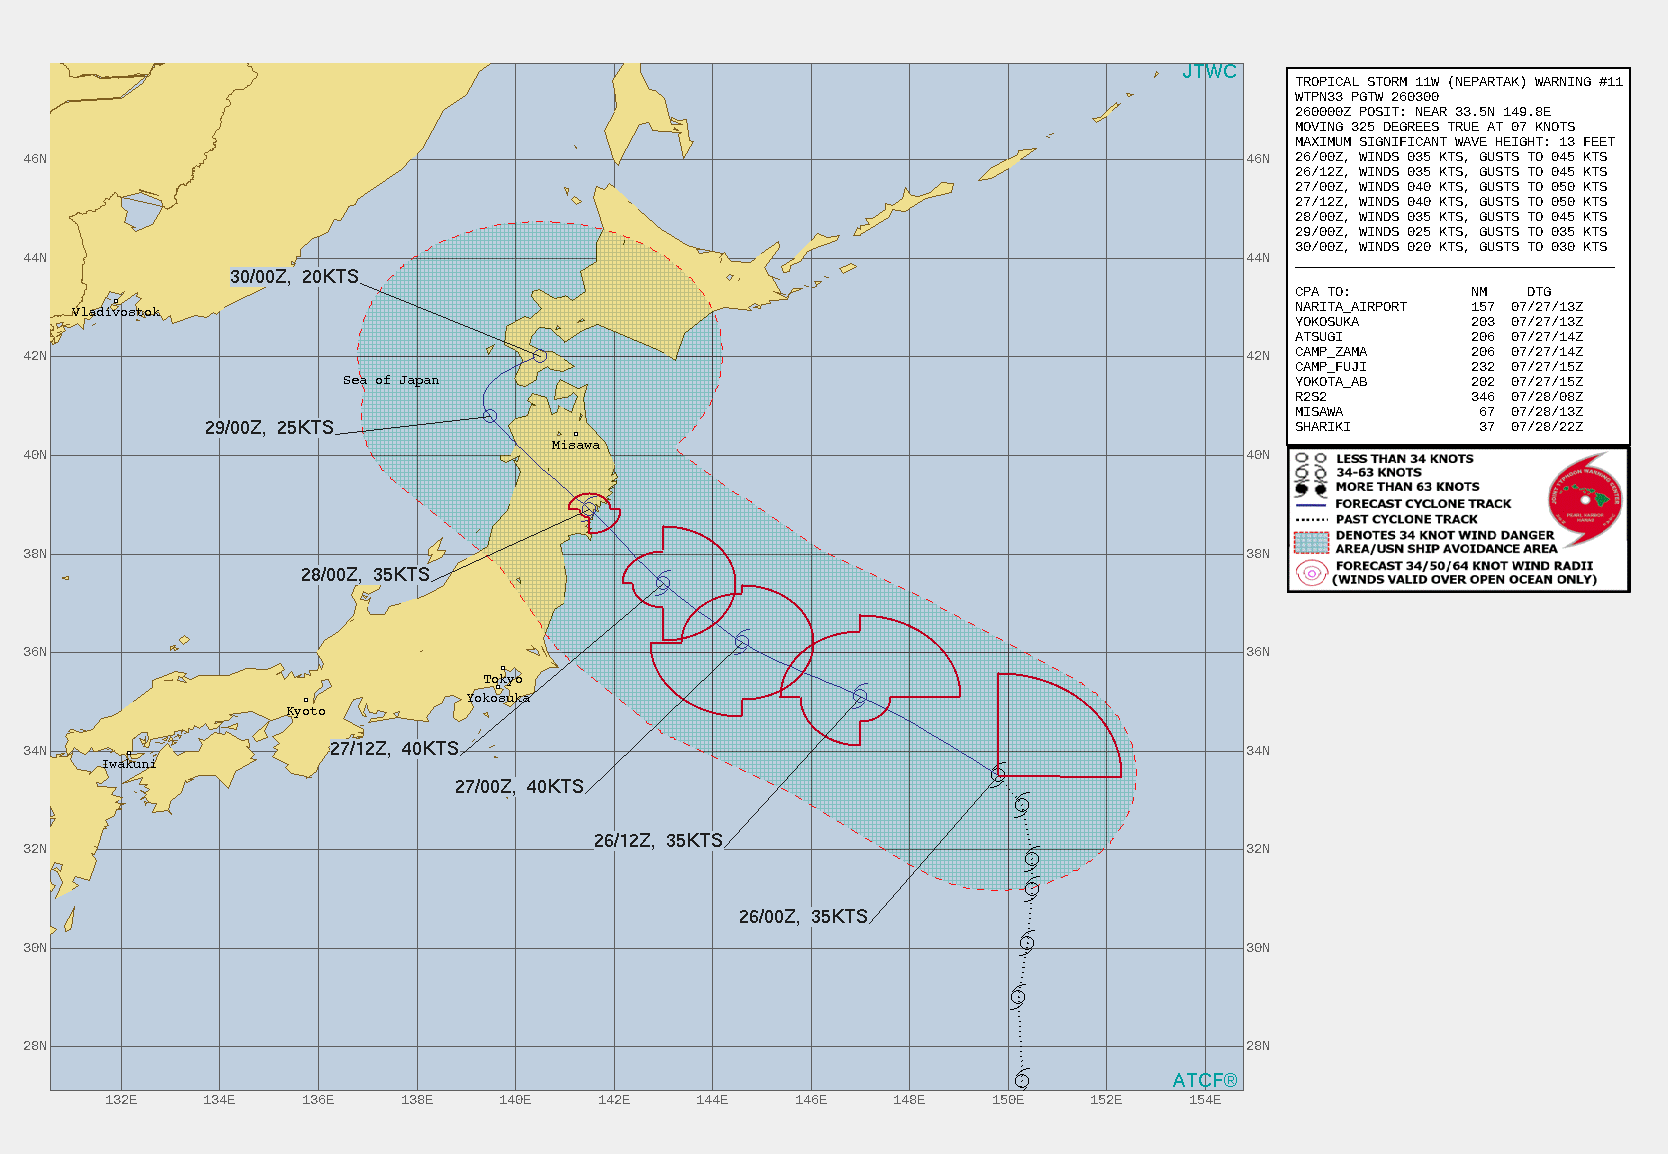 STS 11W(NEPARTAK). WARNING 11 ISSUED AT 26/03UTC. THERE ARE NO SIGNIFICANT CHANGES TO THE FORECAST FROM THE PREVIOUS WARNING.  FORECAST DISCUSSION: SUBTROPICAL CYCLONE 11W WILL CONTINUE TO TRACK NORTHWESTWARD UNDER THE STEERING SUBTROPICAL RIDGE ON A PINWHEEL PATTERN AROUND AN UPPER LEVEL LOW TO THE SOUTHWEST, MAKING LANDFALL OVER NORTHERN HONSHU NEAR KESENNUMA, JAPAN, NEAR 48H. THE MARGINAL ENVIRONMENT - STRONG VERTICAL WIND SHEAR OFFSET BY STRONG POLEWARD OUTFLOW AND WARM SST - WILL FUEL A SLIGHT INTENSIFICATION TO 40KNOTS AT 24-36H. AFTERWARD, THE UPPER LEVEL LOW WILL COME INTO CLOSE PROXIMITY OF 11W AND PROMOTE SUBSIDENCE ALOFT AND INDUCE THE INFLOW OF COLD DRY AIR IN THE LOWER LEVELS. THESE PLUS THE TOPOGRAPHICAL EFFECTS AFTER LANDFALL WILL GRADUALLY ERODE THE SYSTEM DOWN TO 25KNOTS BY THE TIME  IT EXITS INTO THE SEA OF JAPAN (SOJ) BEFORE 96H. THE COOLER SSTS IN THE SOJ FOLLOWED BY A SECONDARY LANDFALL INTO HOKKAIDO AFTER THE SYSTEM RECURVES NORTHEASTWARD AROUND THE STR AXIS WILL FURTHER ERODE 11W TO DISSIPATION BY 96H.